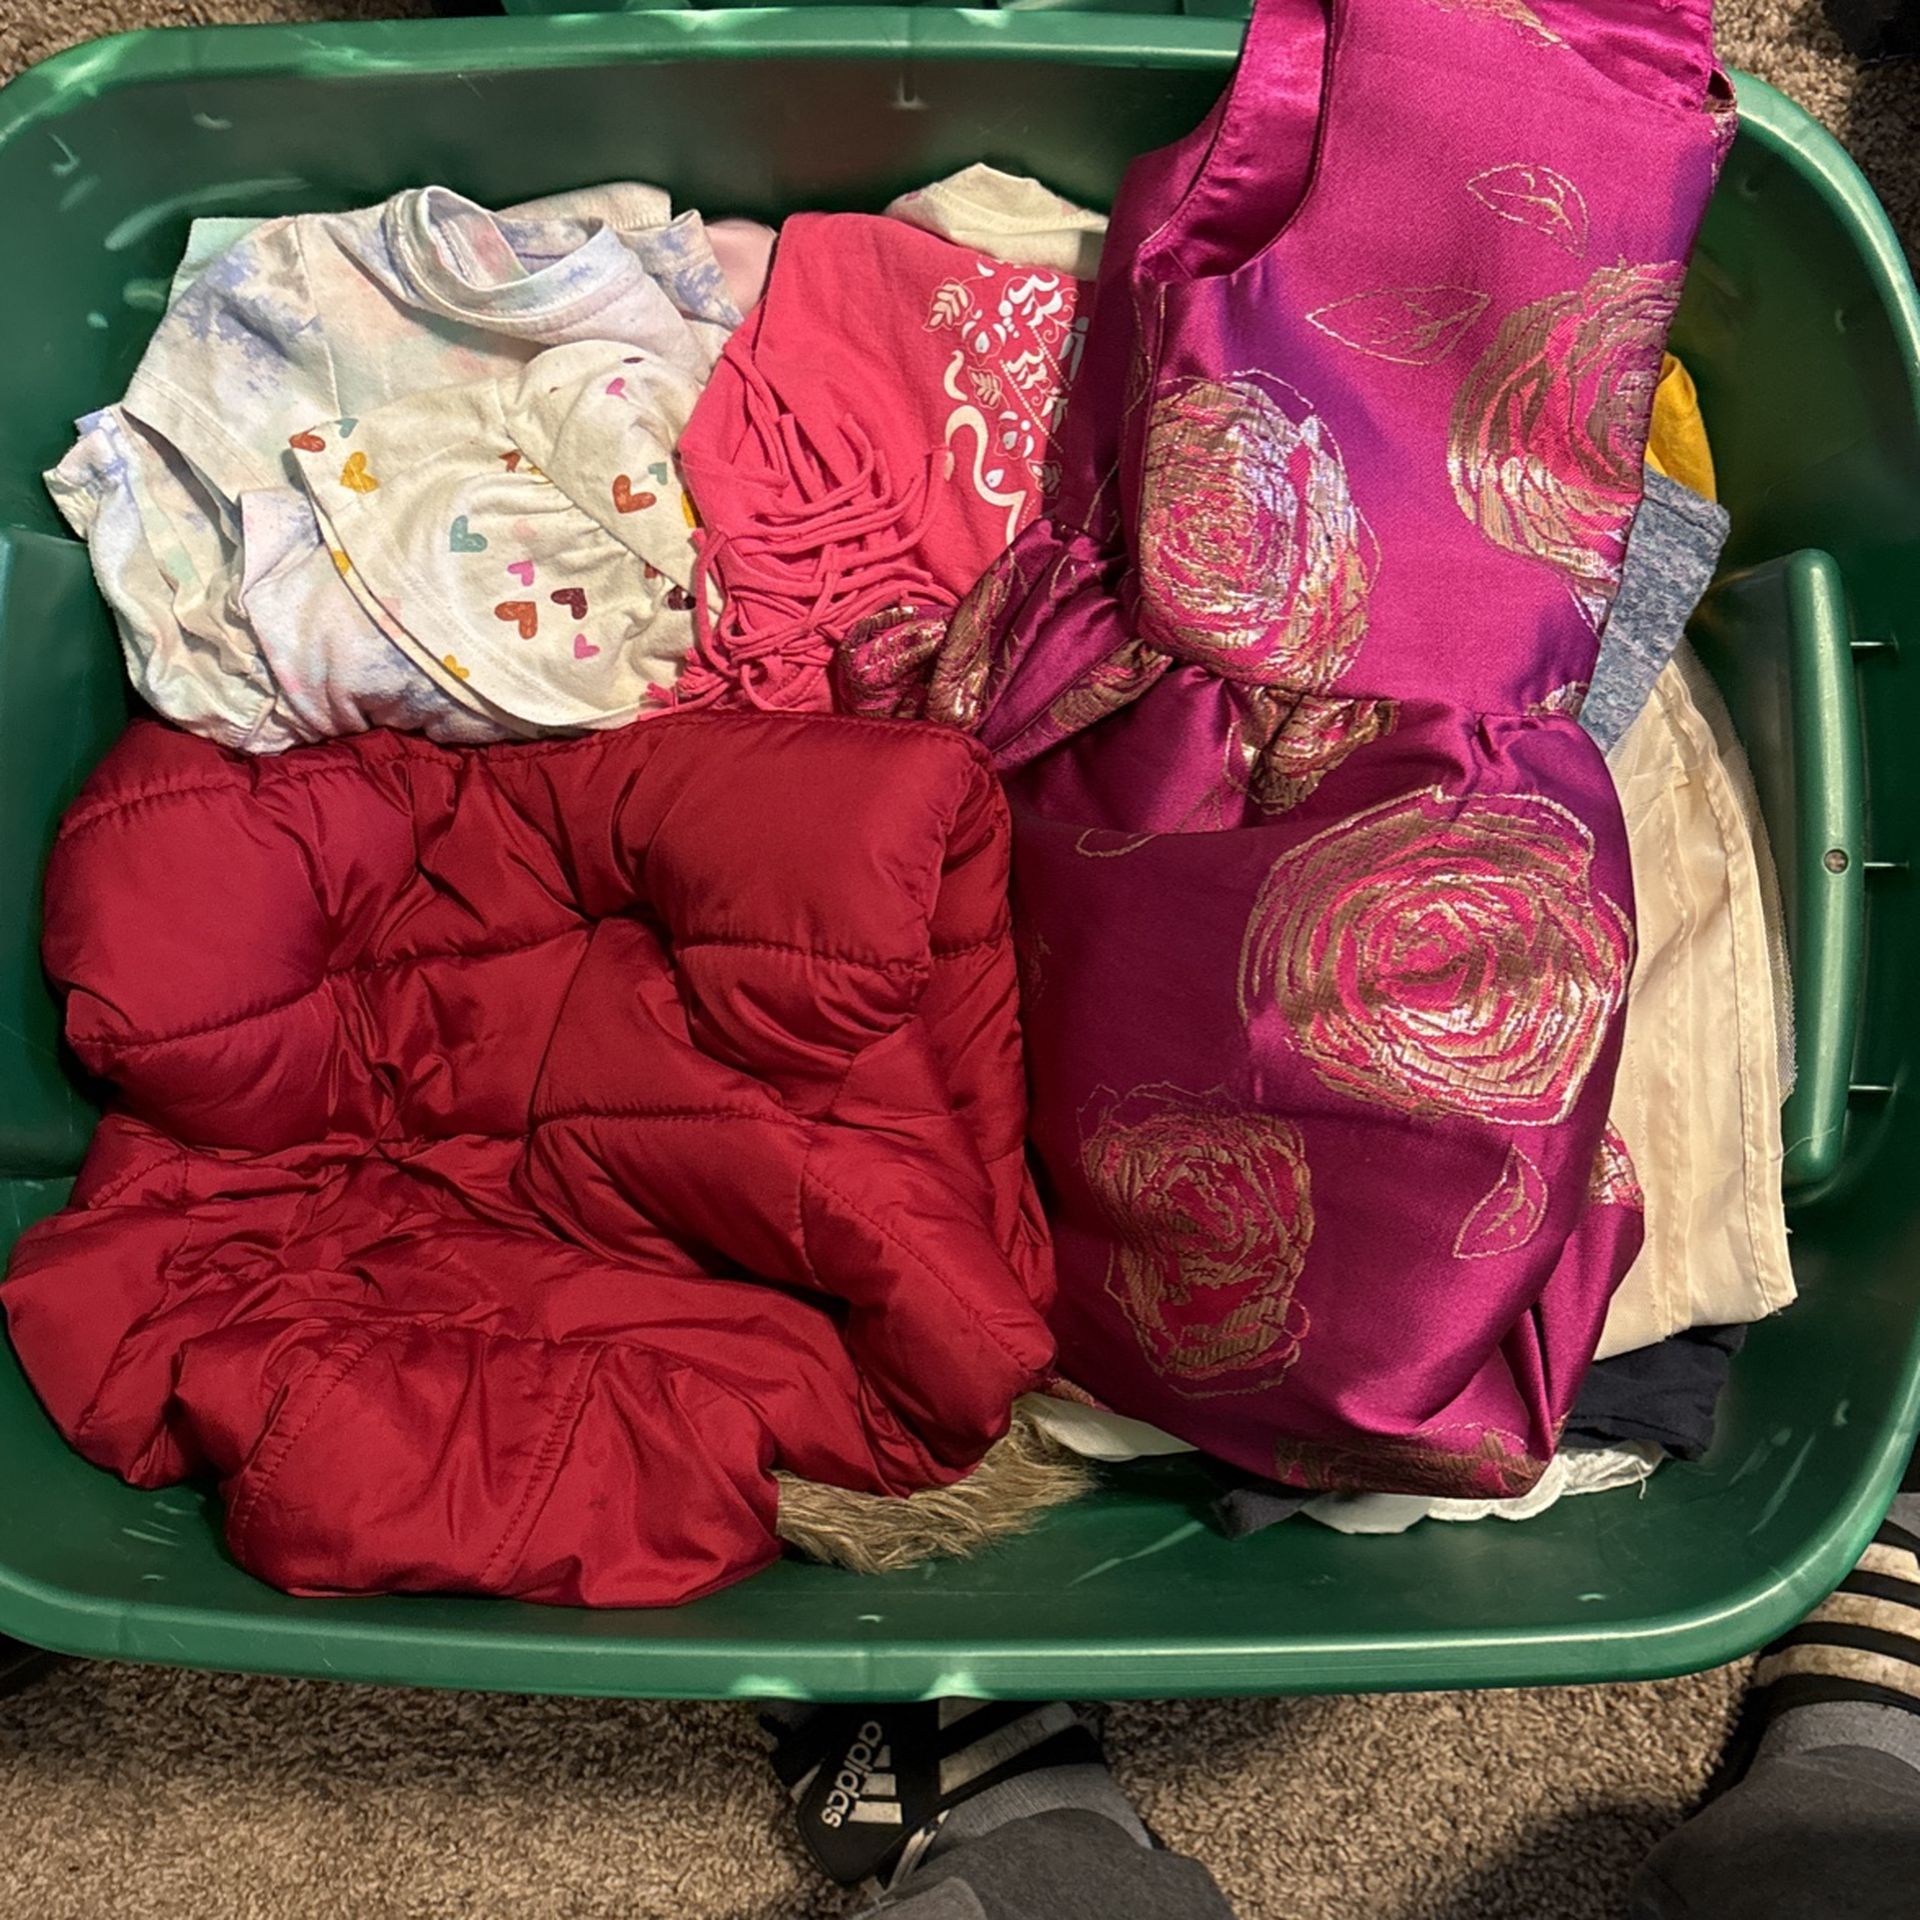 Tote Full Of Kids Clothes For “Girls” 